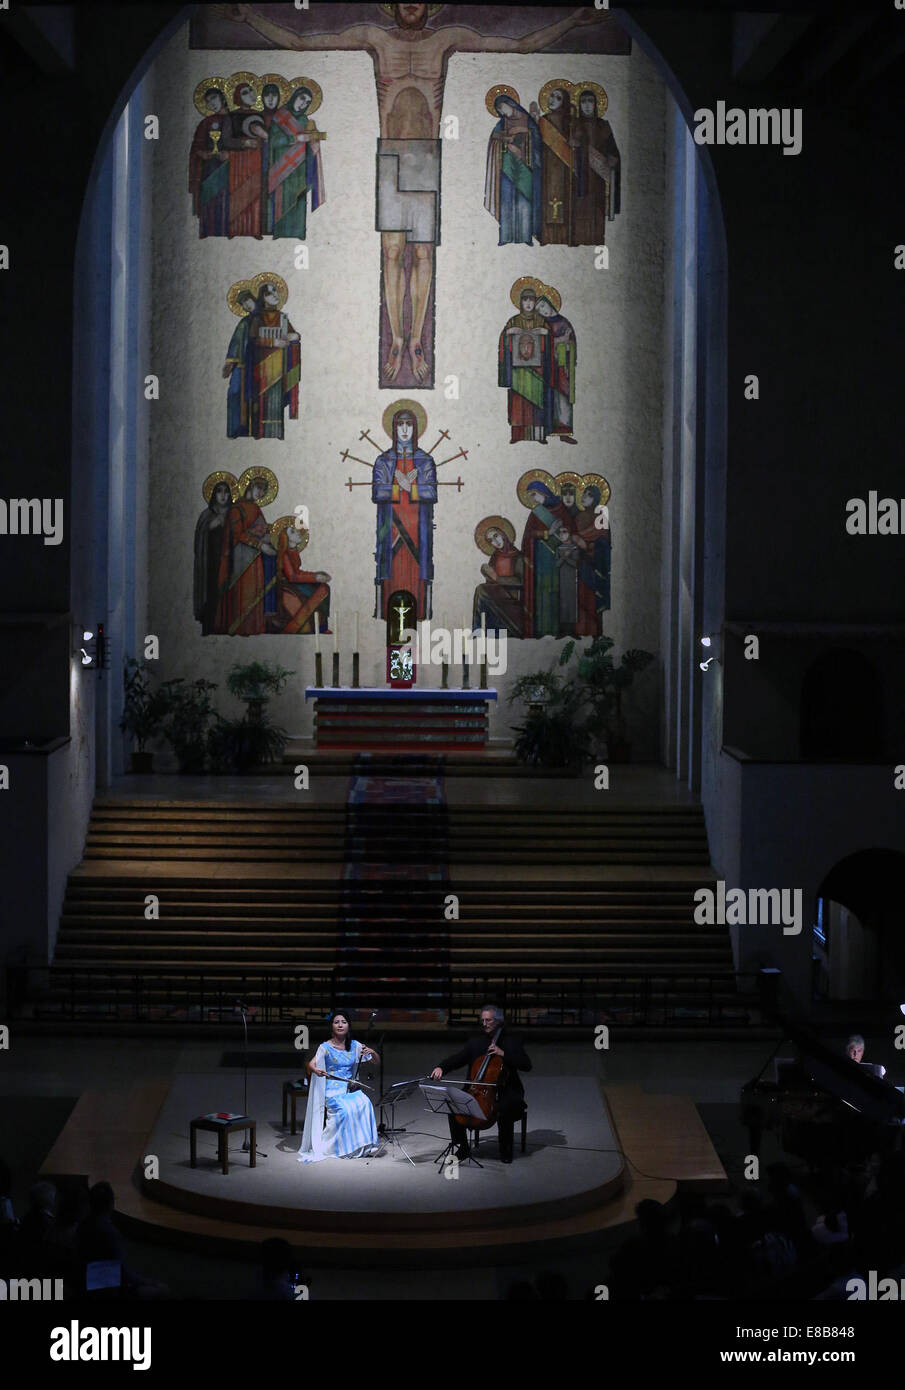 Frankfurt, Germany. 3rd Oct, 2014. Chinese musician Ma Xiaohui (L) performs Erhu, a two-stringed wooden instrument, with German violinist Daniel Robert Graf(C) and German pianist Carl-Martin Buttgereit(R) during a cencert held at a cathedral in Frankfurt, Germany, on Oct. 3, 2014. © Luo Huanhuan/Xinhua/Alamy Live News Stock Photo